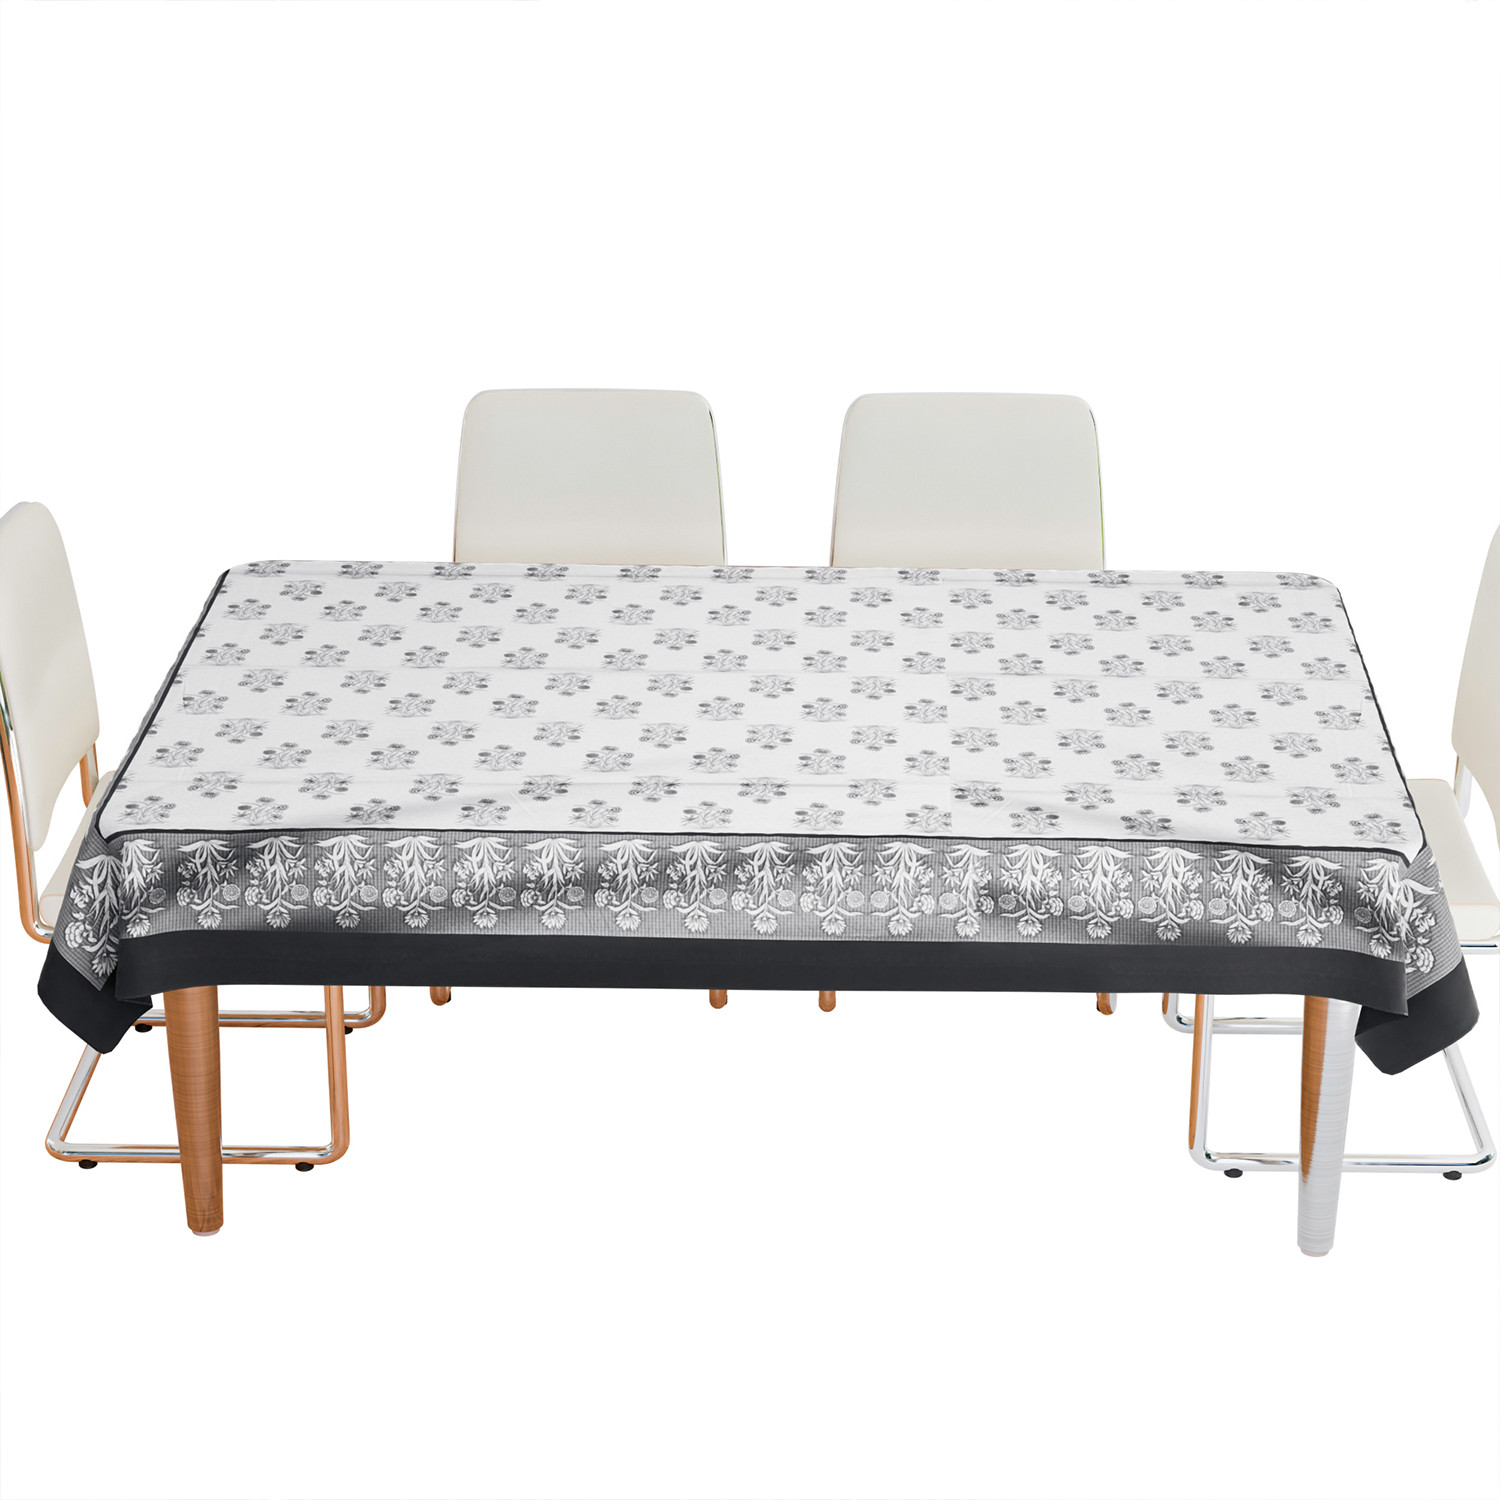 Kuber Industries Dining Table Cover | Polyester Table Cloth Cover | 6-Seater Table Cloth | Harmony Table Cover | Table Protector | Table Cover for Dining Table | 60x90 Inch | DTC | White & Black